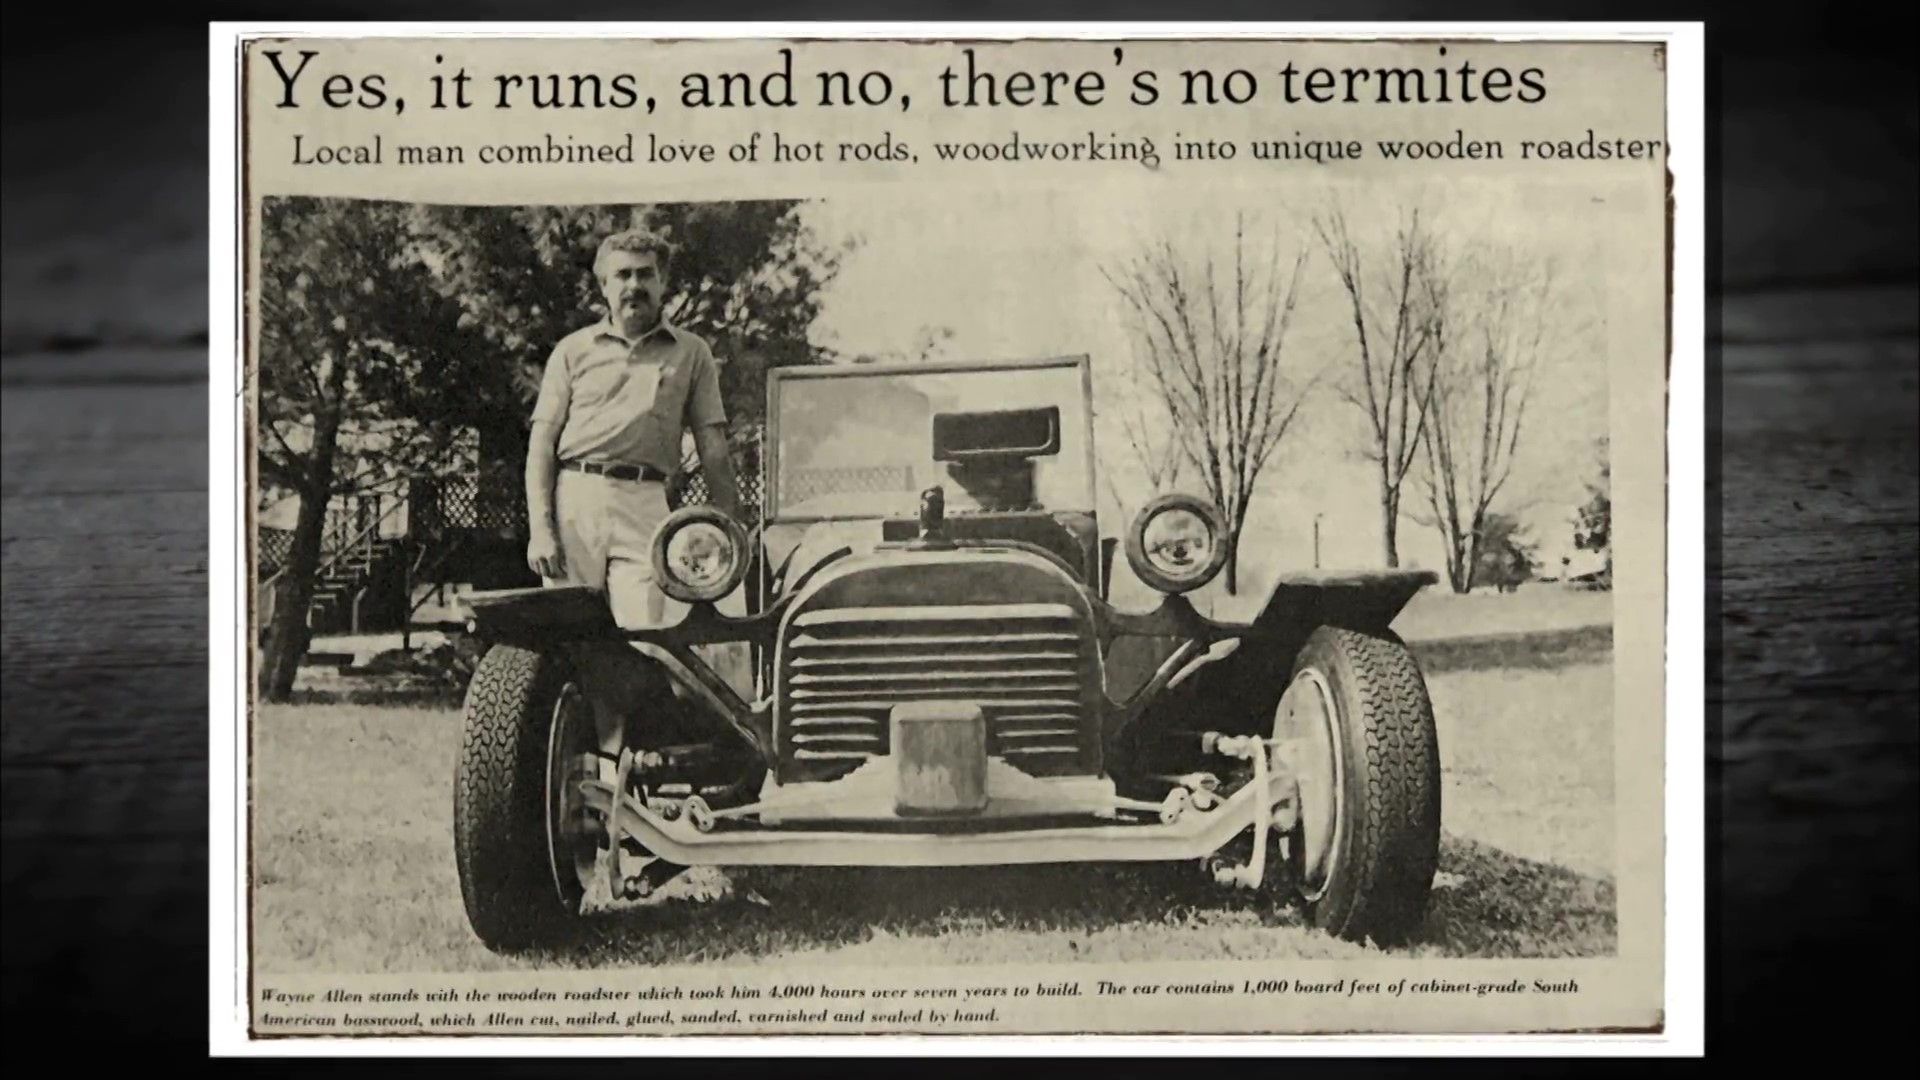 Wayne Allen and the Model-T feature in a Newspaper article circa. '80s